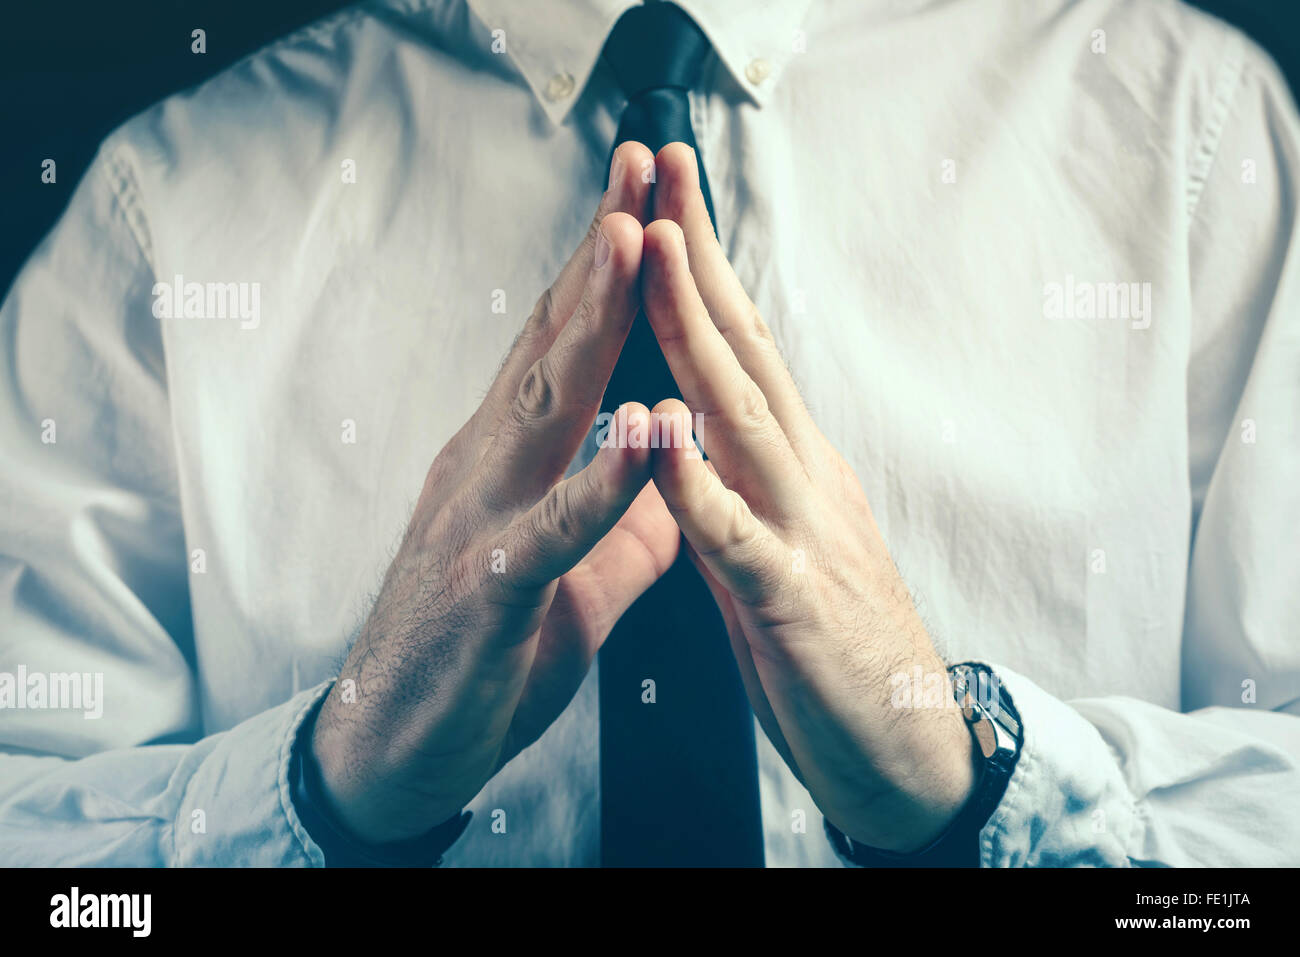 Confident businessman steepling gesture, fingers pressed in steeple position as sign of confidence, retro toned image. Stock Photo